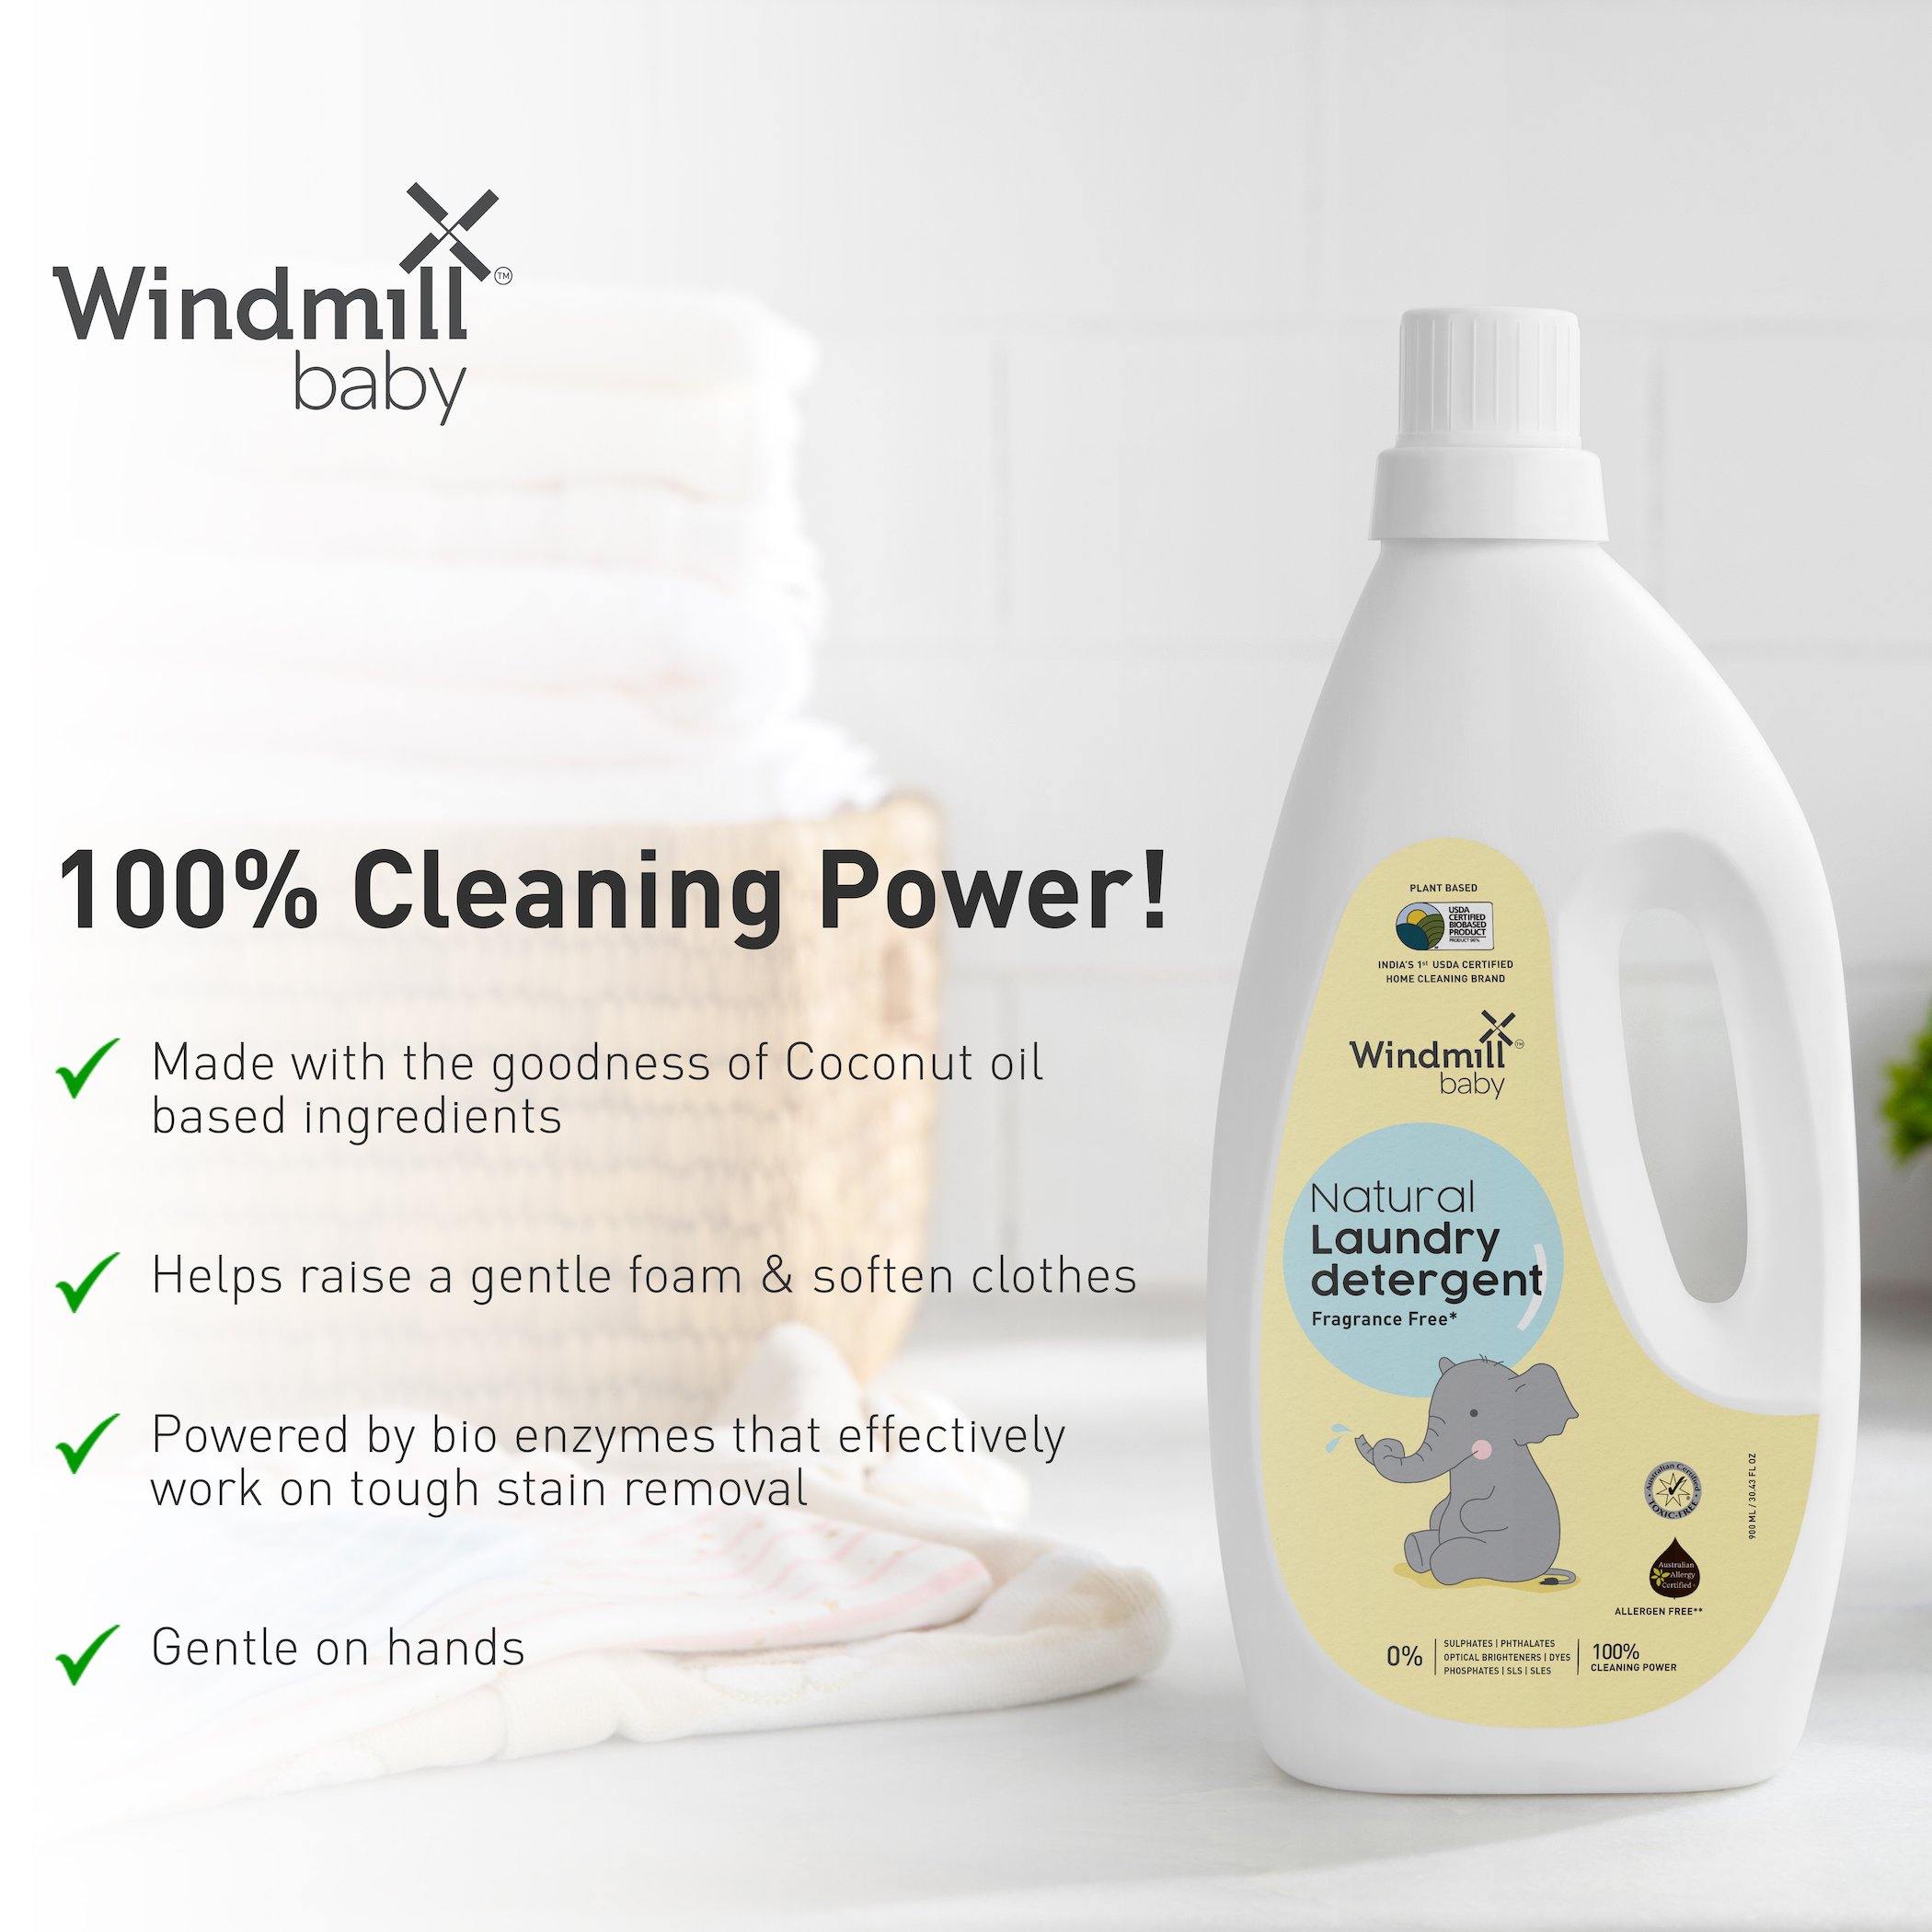 Natural Laundry Detergent Fragrance Free - Windmill Baby